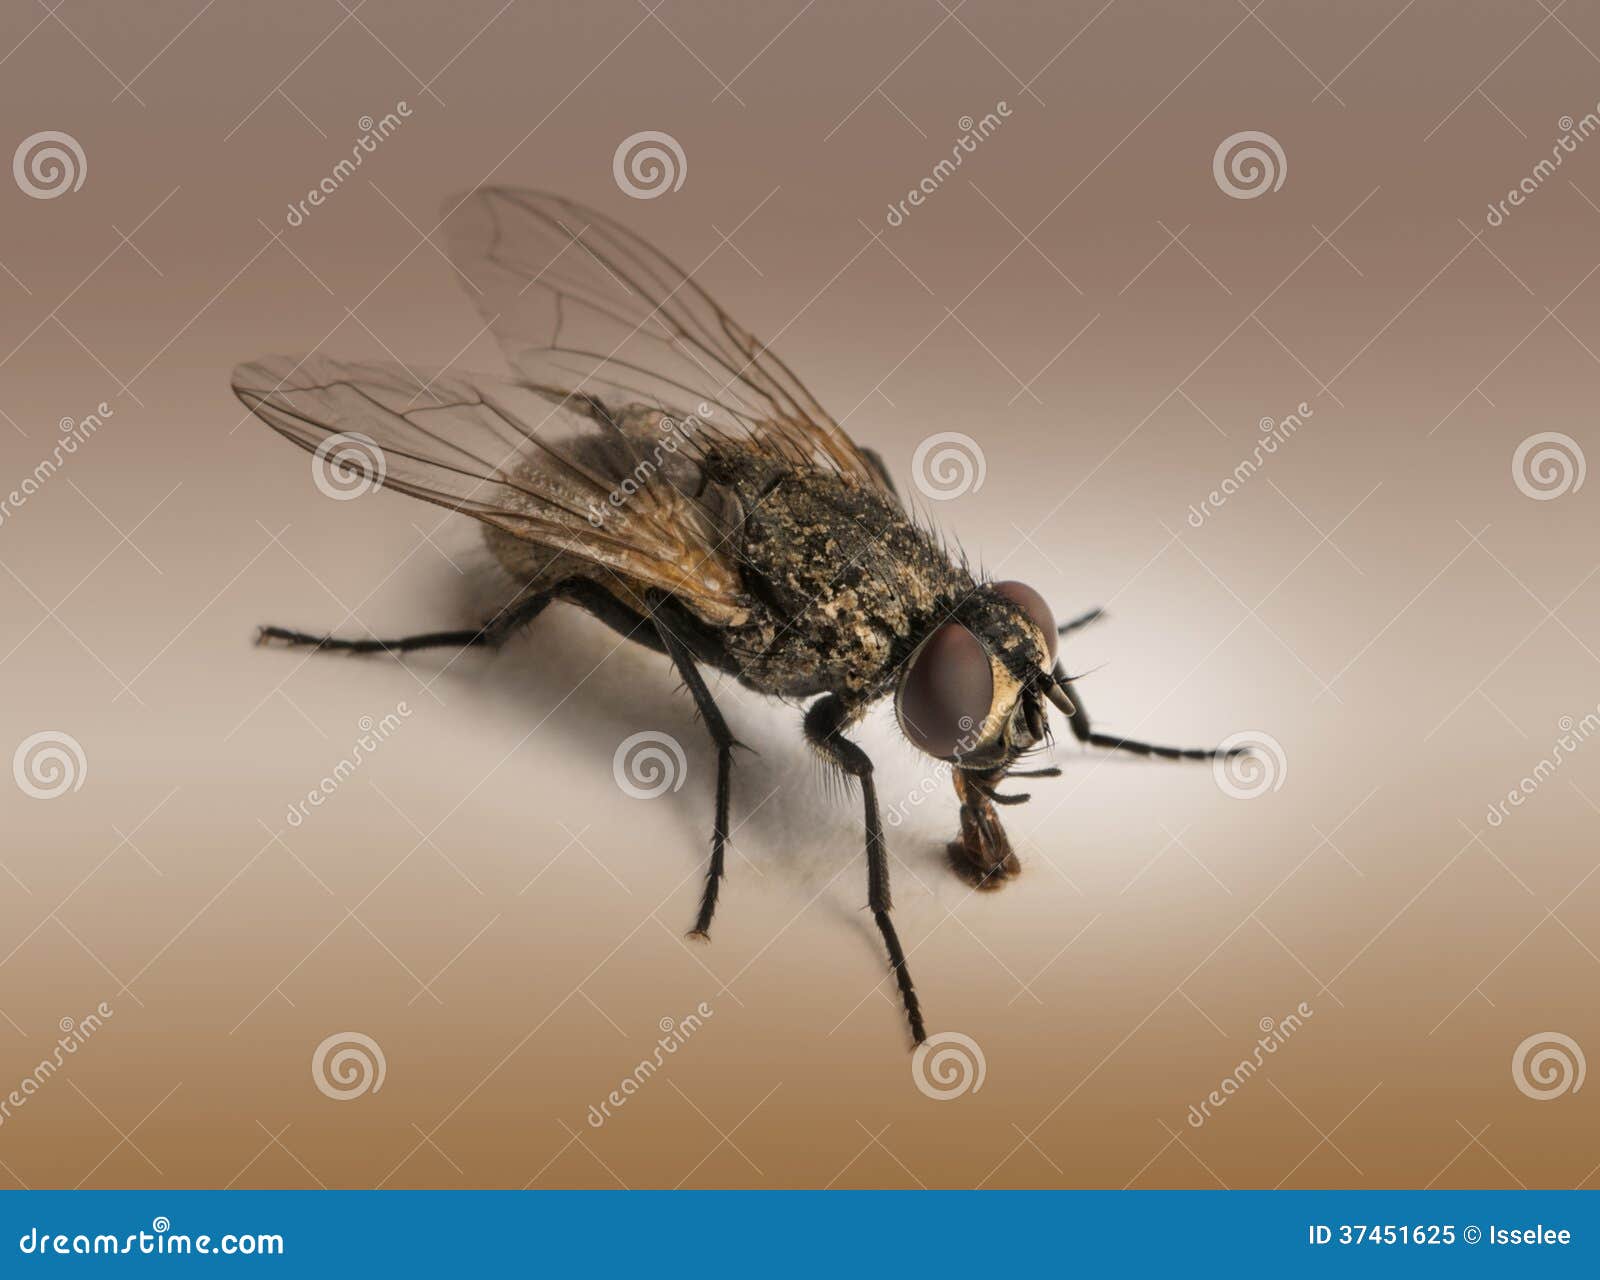 dirty housefly, musca domestica on brown background